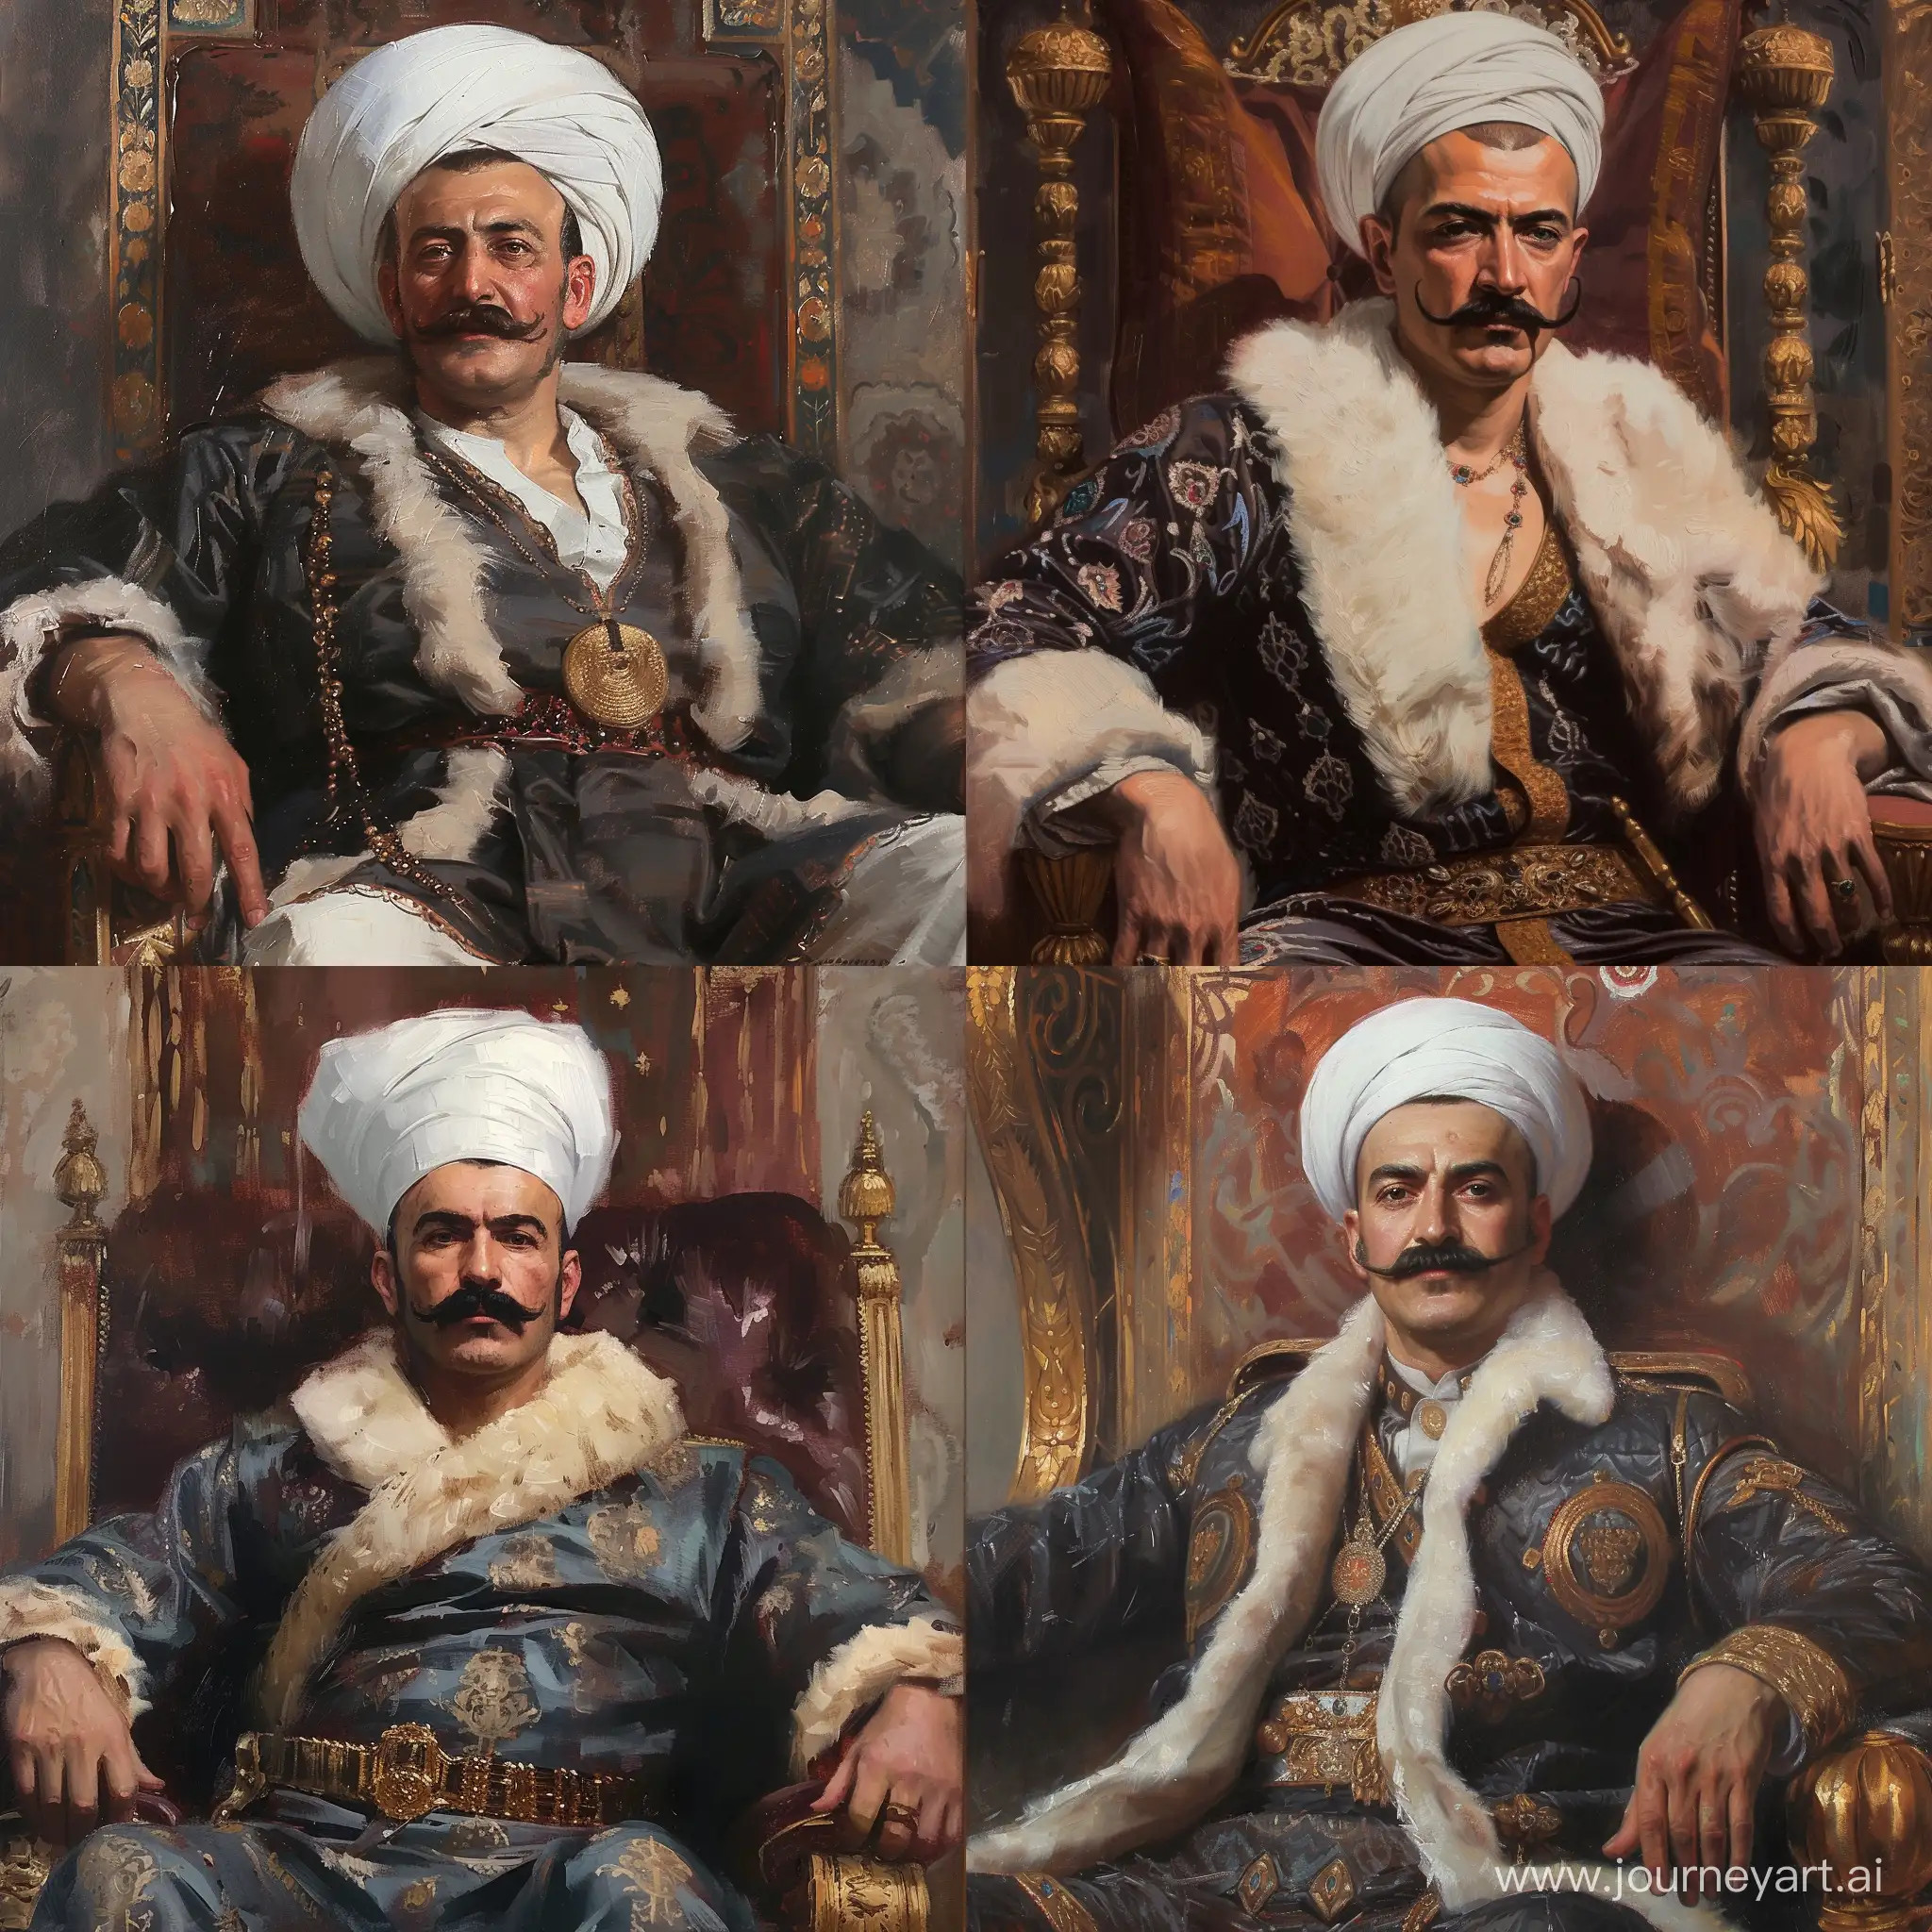 30 years old Ottoman Sultan Selim I sitting on throne. He has handlebar mustache and shaved face. Ottoman curved nose. Wearing luxury Ottoman caftan with fur collars and big white Ottoman turban. In ottoman palace. Oil painting. brush strikes.